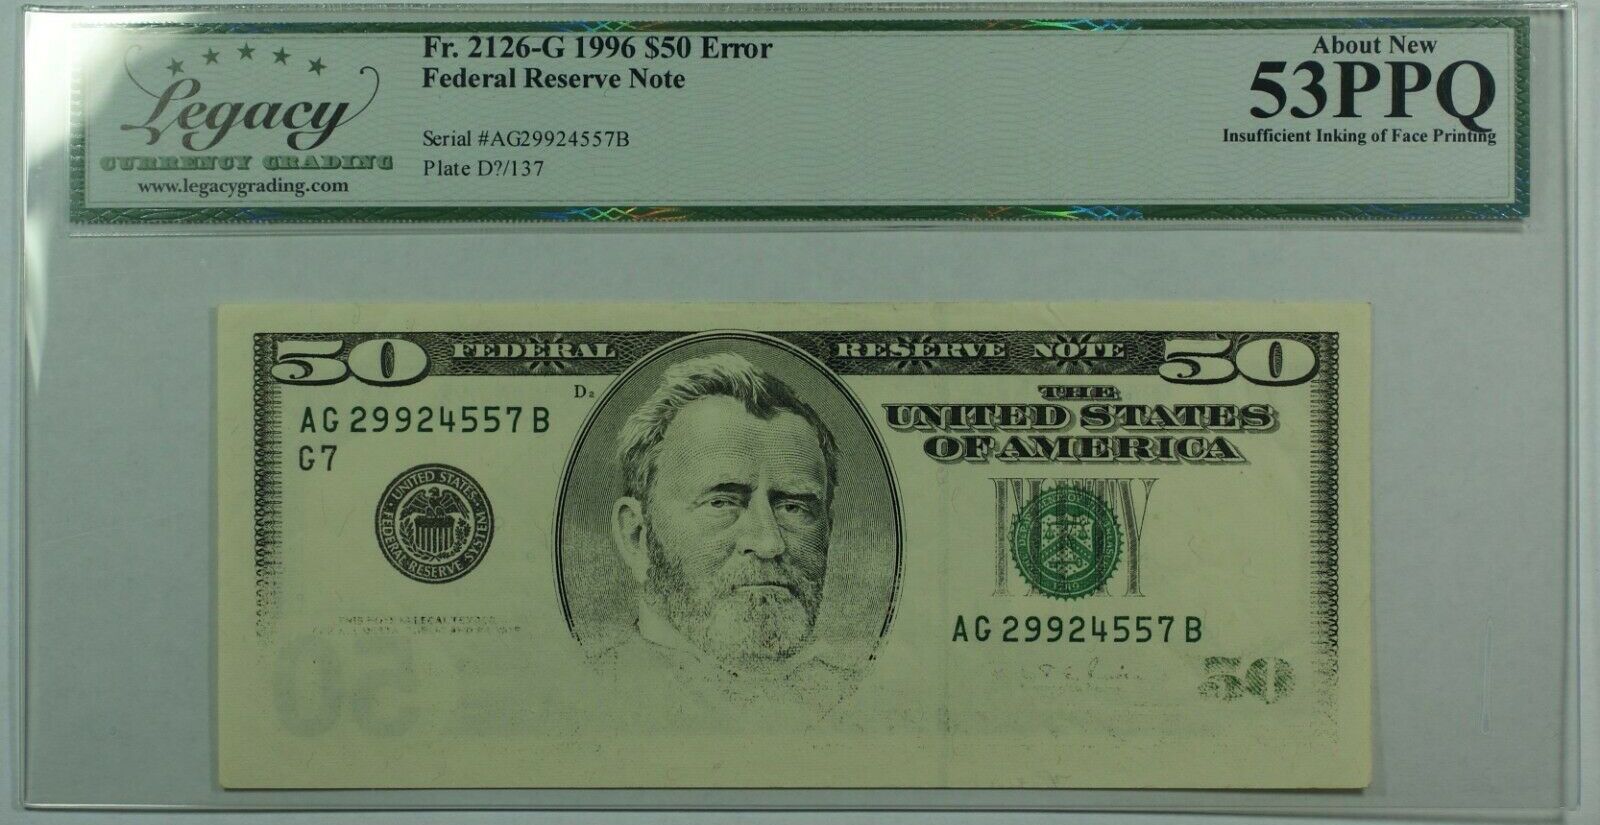 A record number of $50 bills were printed last year. It's not why